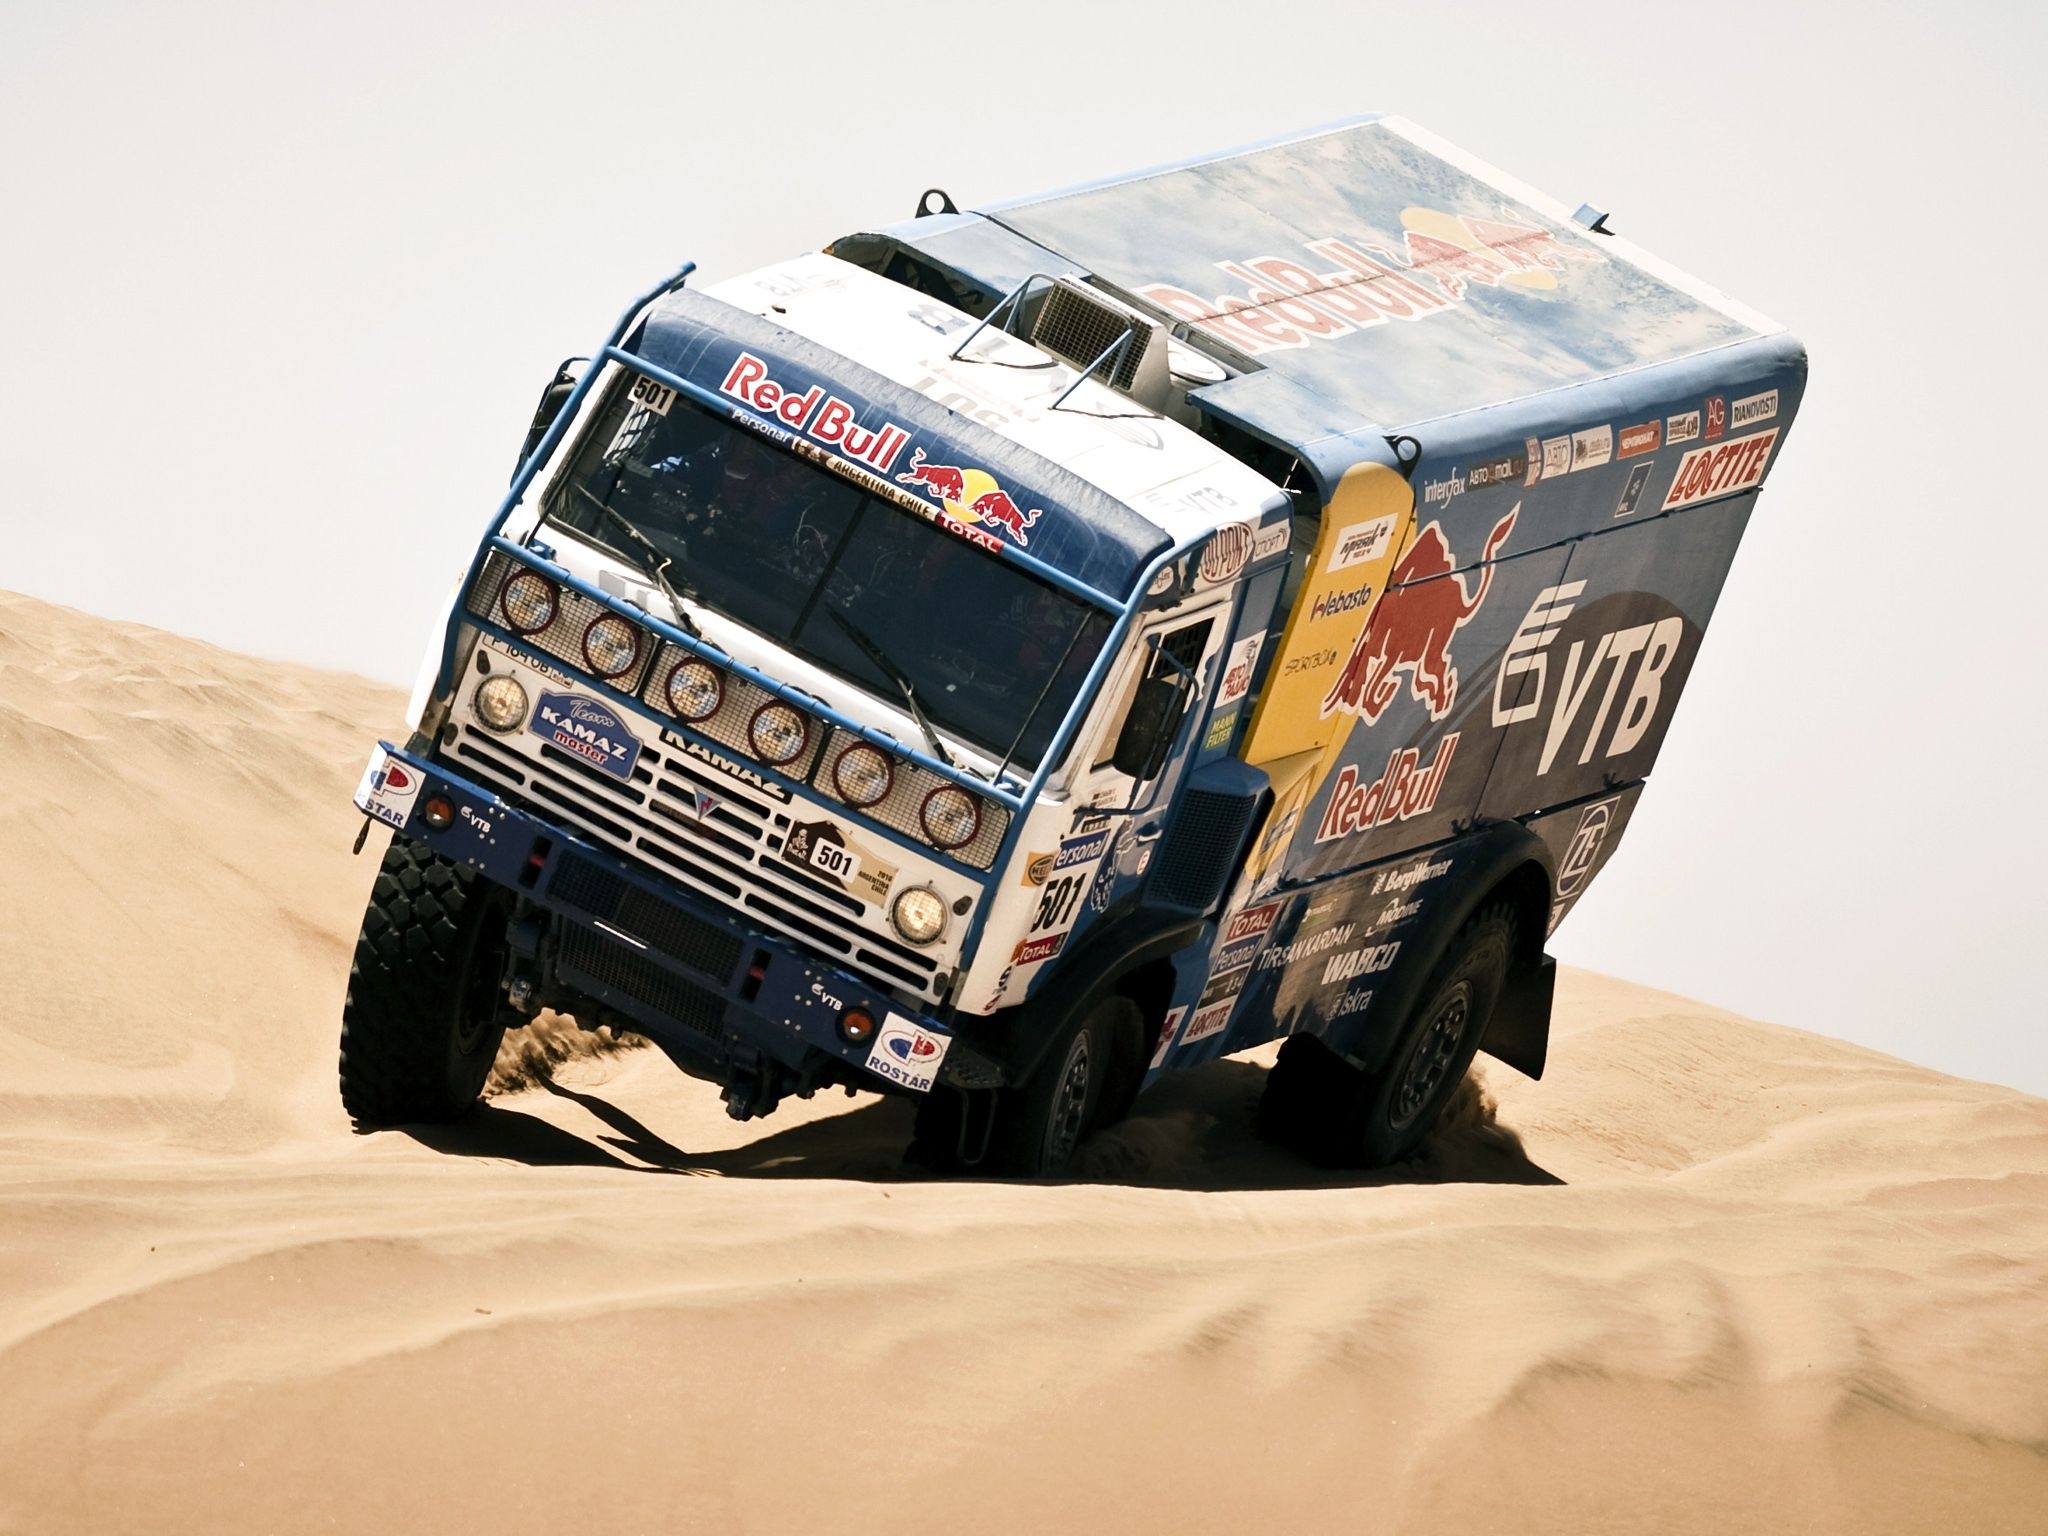 Rally Raid: Dangerous Situation On The Way, Extreme Driving, Russian Racing Team, Kamaz-Master, Serious test for automotive mechanics, Sport Truck. 2050x1540 HD Wallpaper.